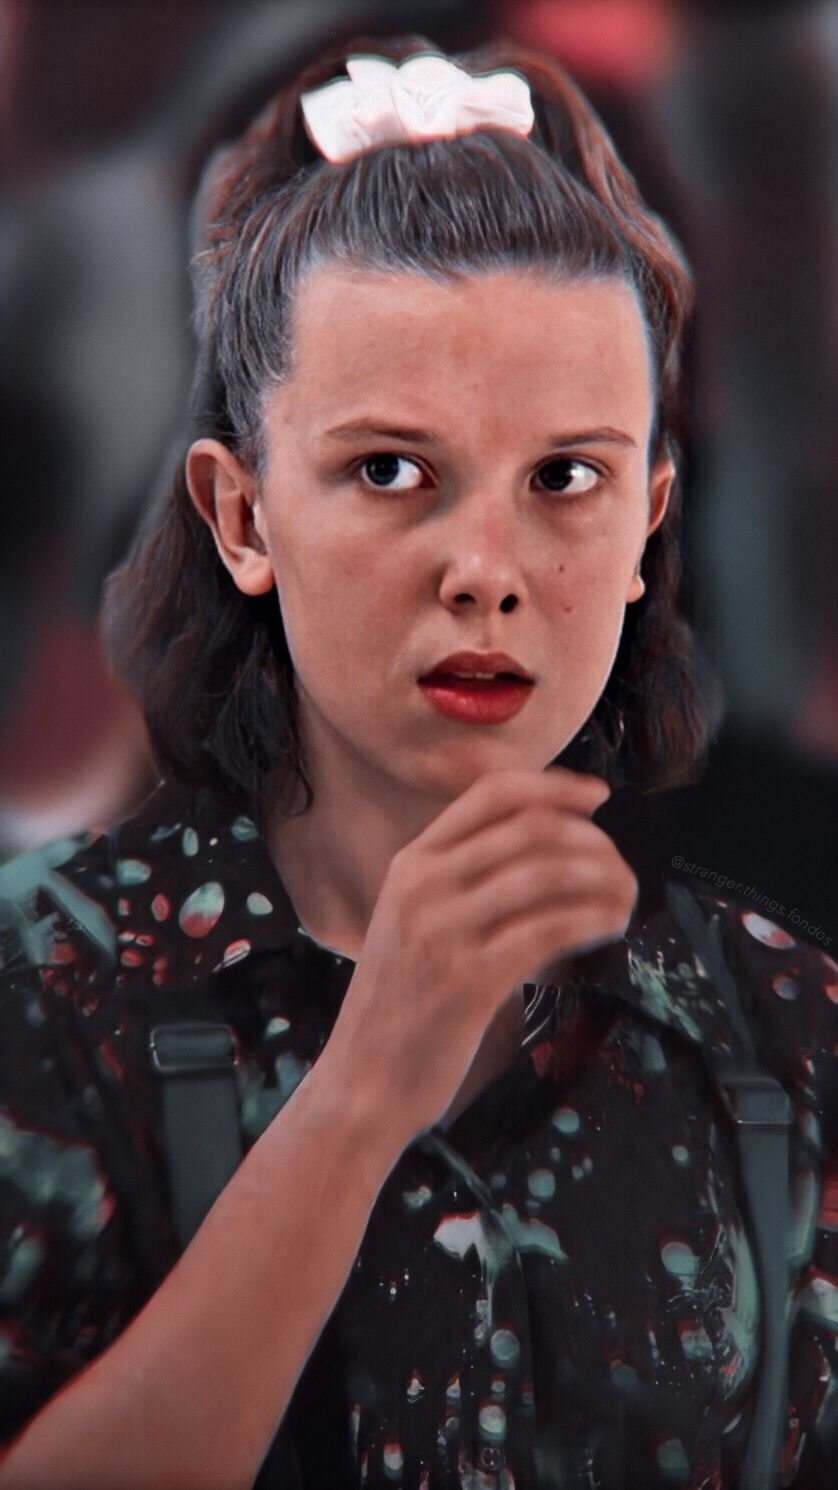 millie bobby brown instagram photos wallpapers wallpaper on millie bobby brown instagram photos wallpapers